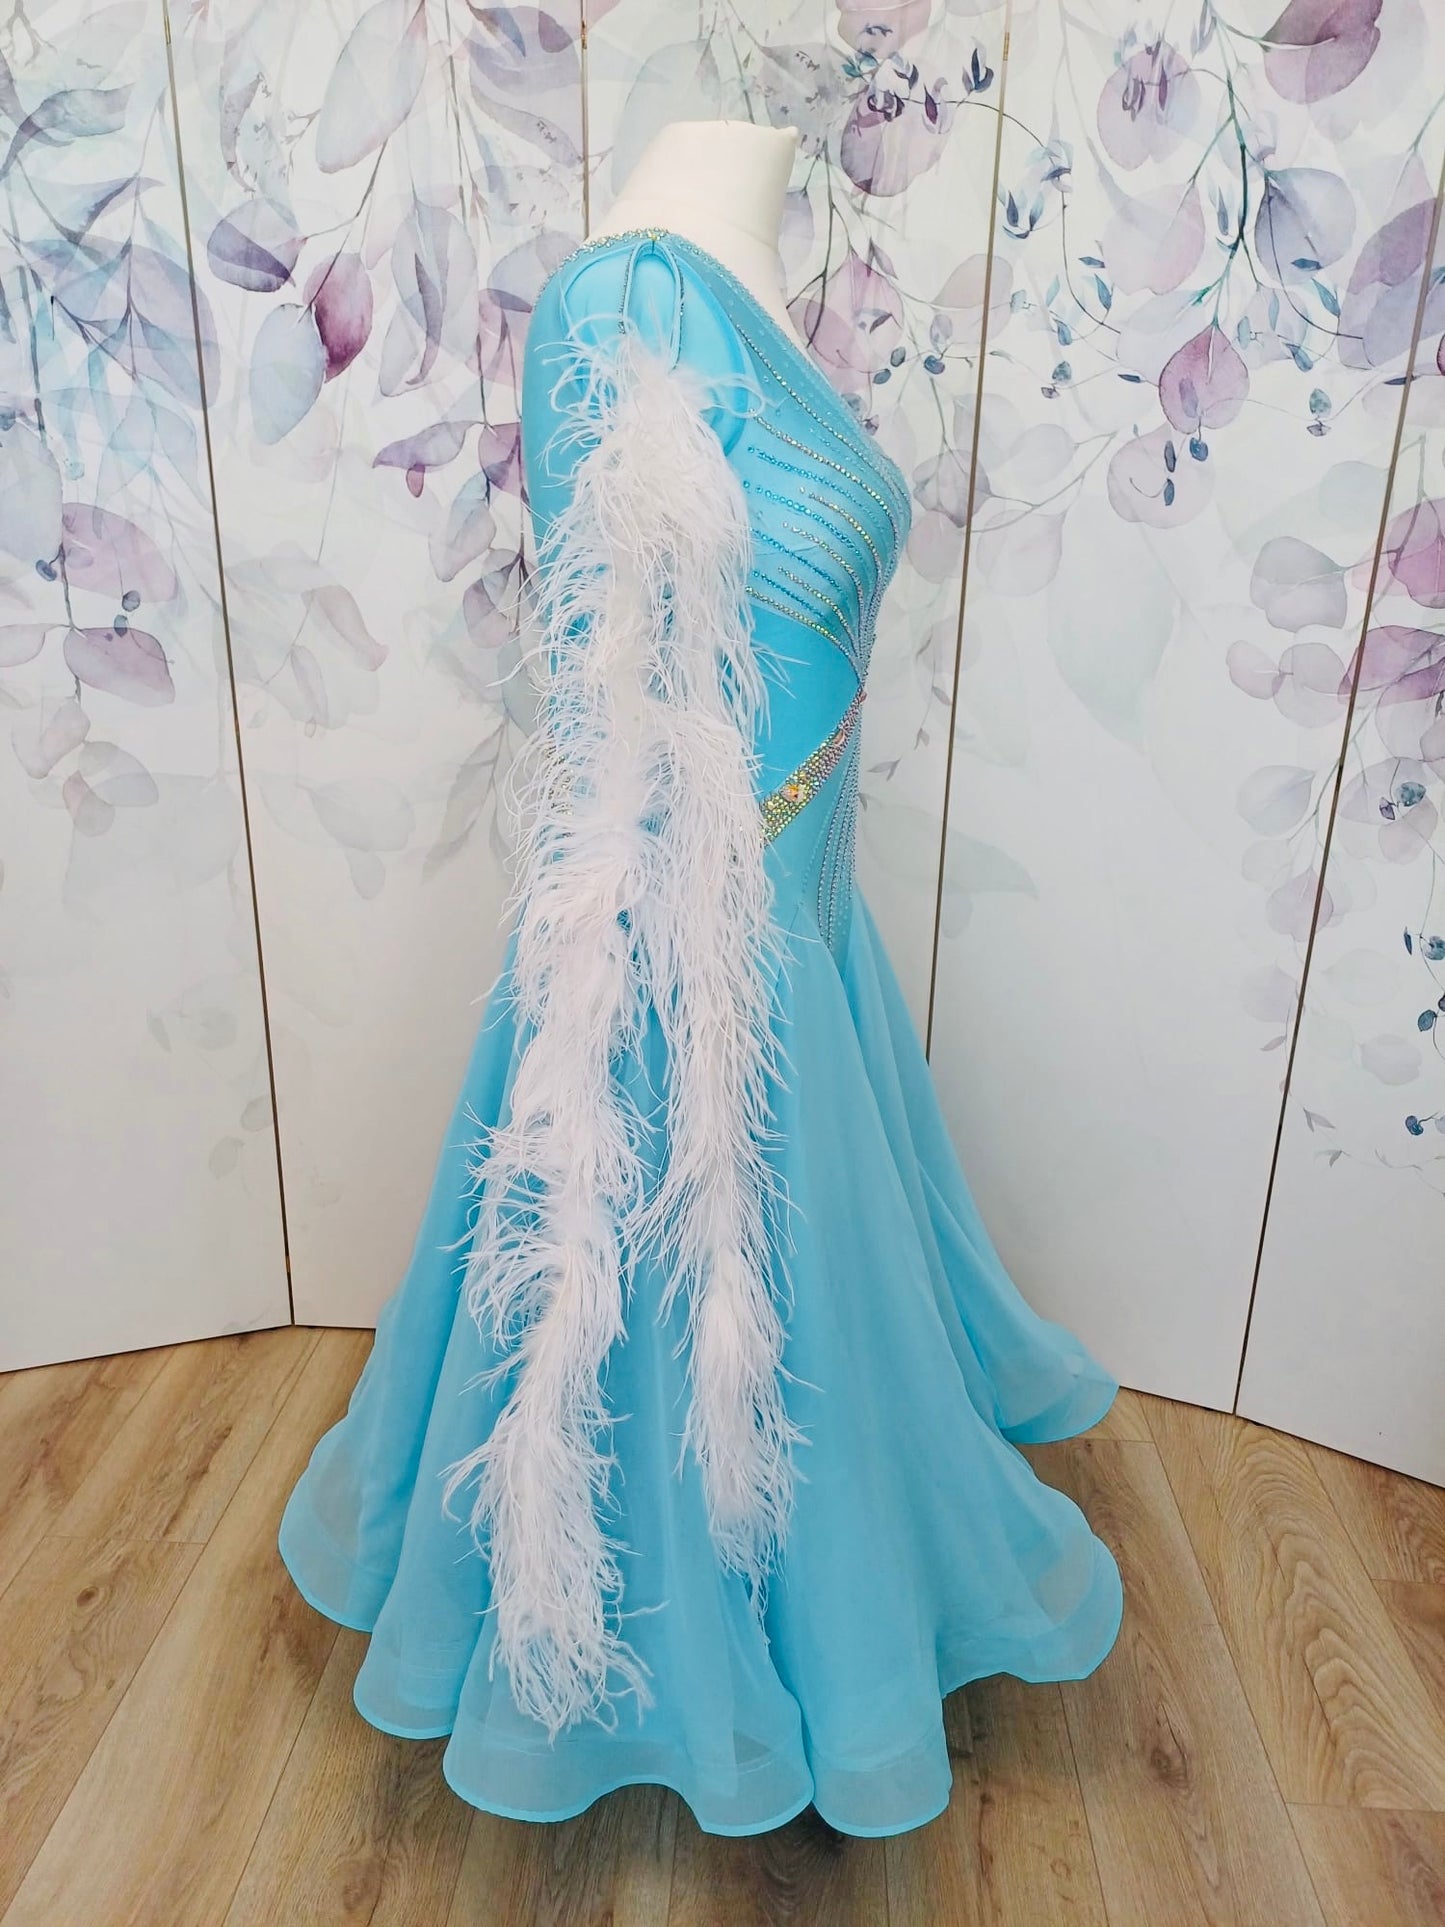 277 Beautiful Ice Blue Competition Ballroom Dance Dress. Stones in AB. Comes with Ostrich feather boa floats. These can be blue & white or a mix of the 2 colours. High back to all for wearing own bra.